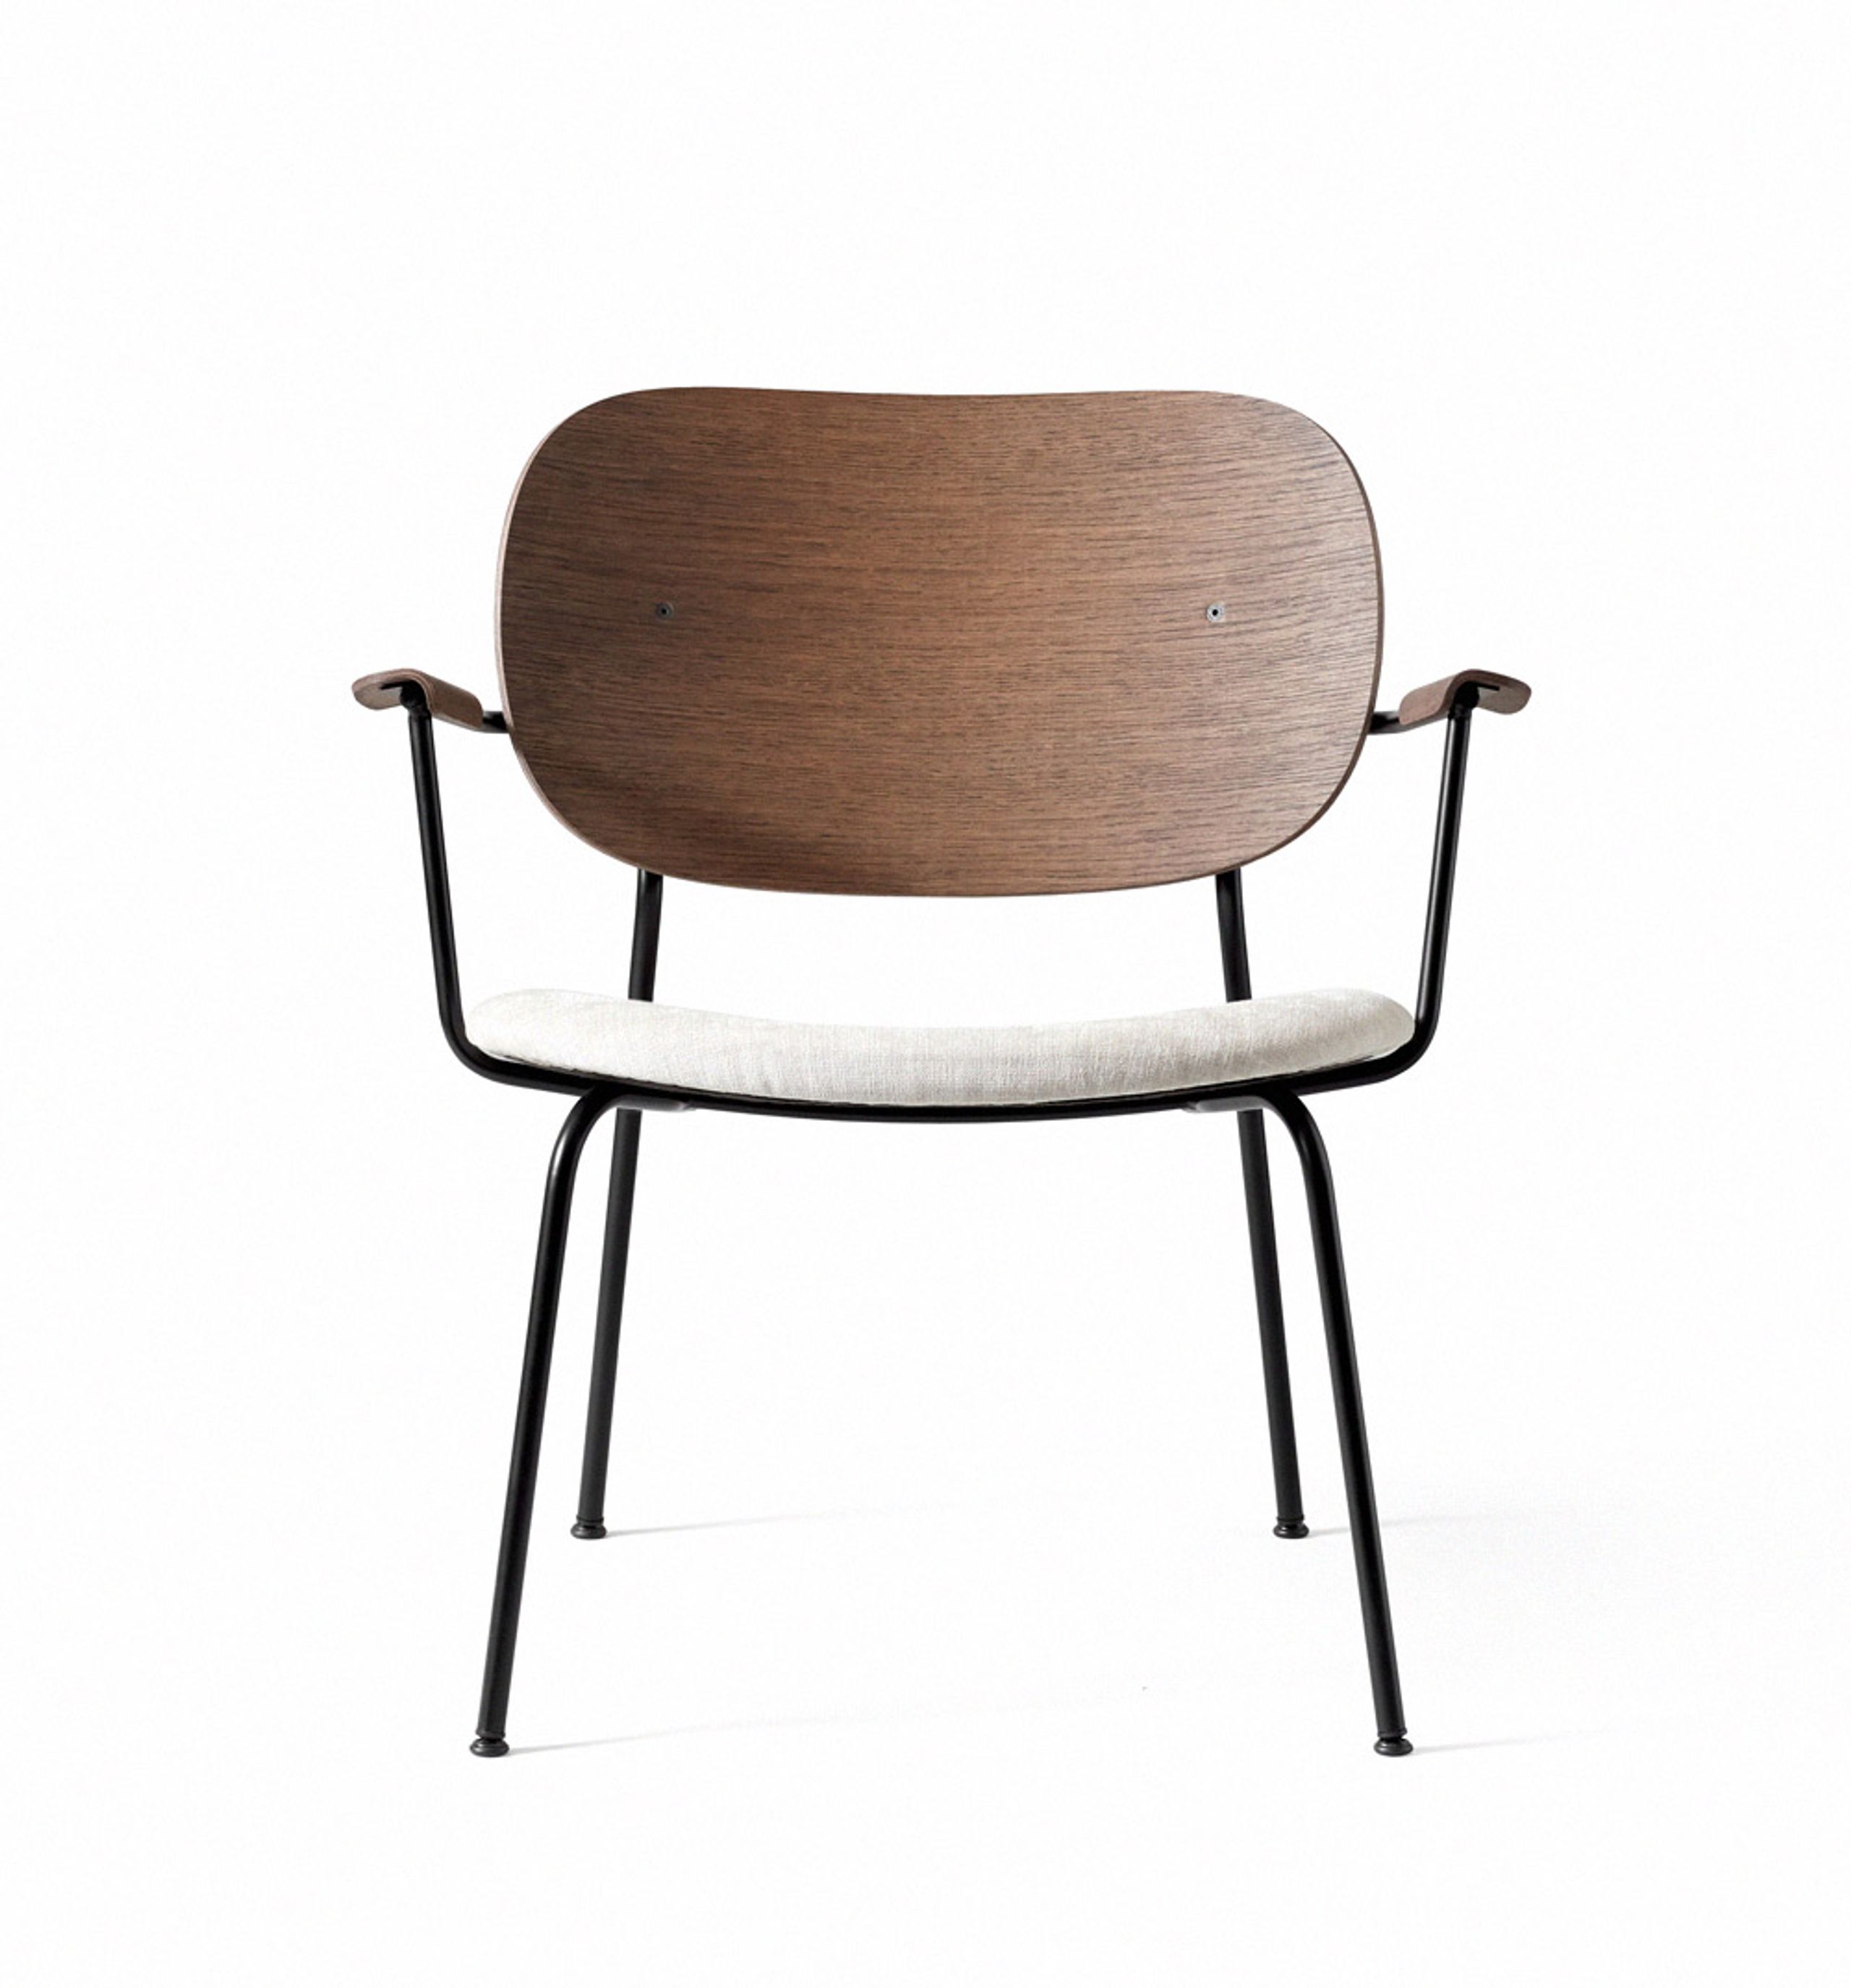 MENU - Stol - Co Lounge Chair - Upholstery: Maple 222 / Dark Stained Oak